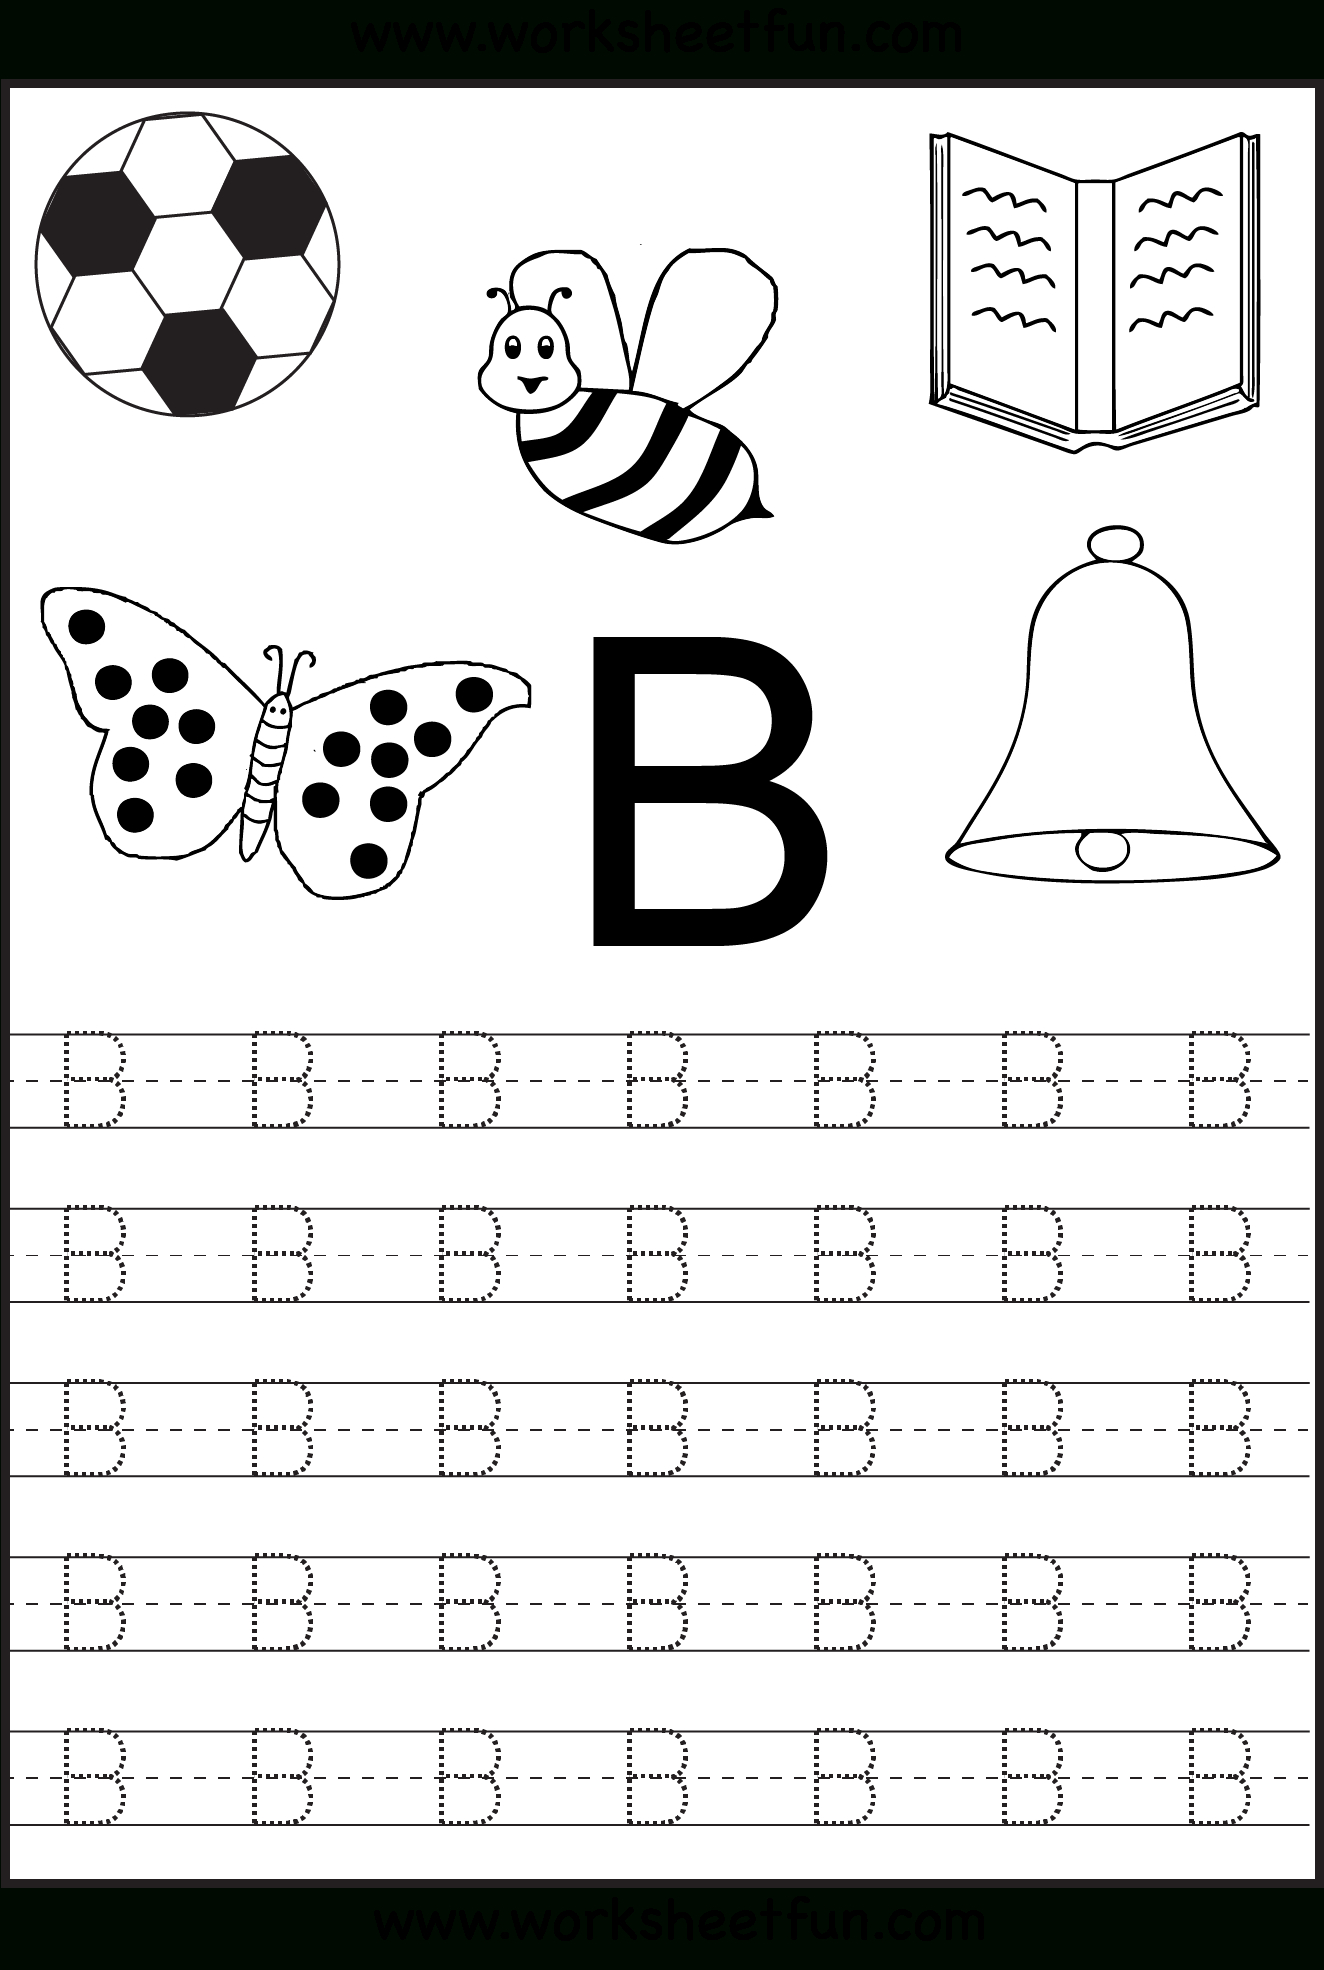 Coloring Book : Printable Letter Tracing Sheets For intended for Letter Tracing Worksheets Template